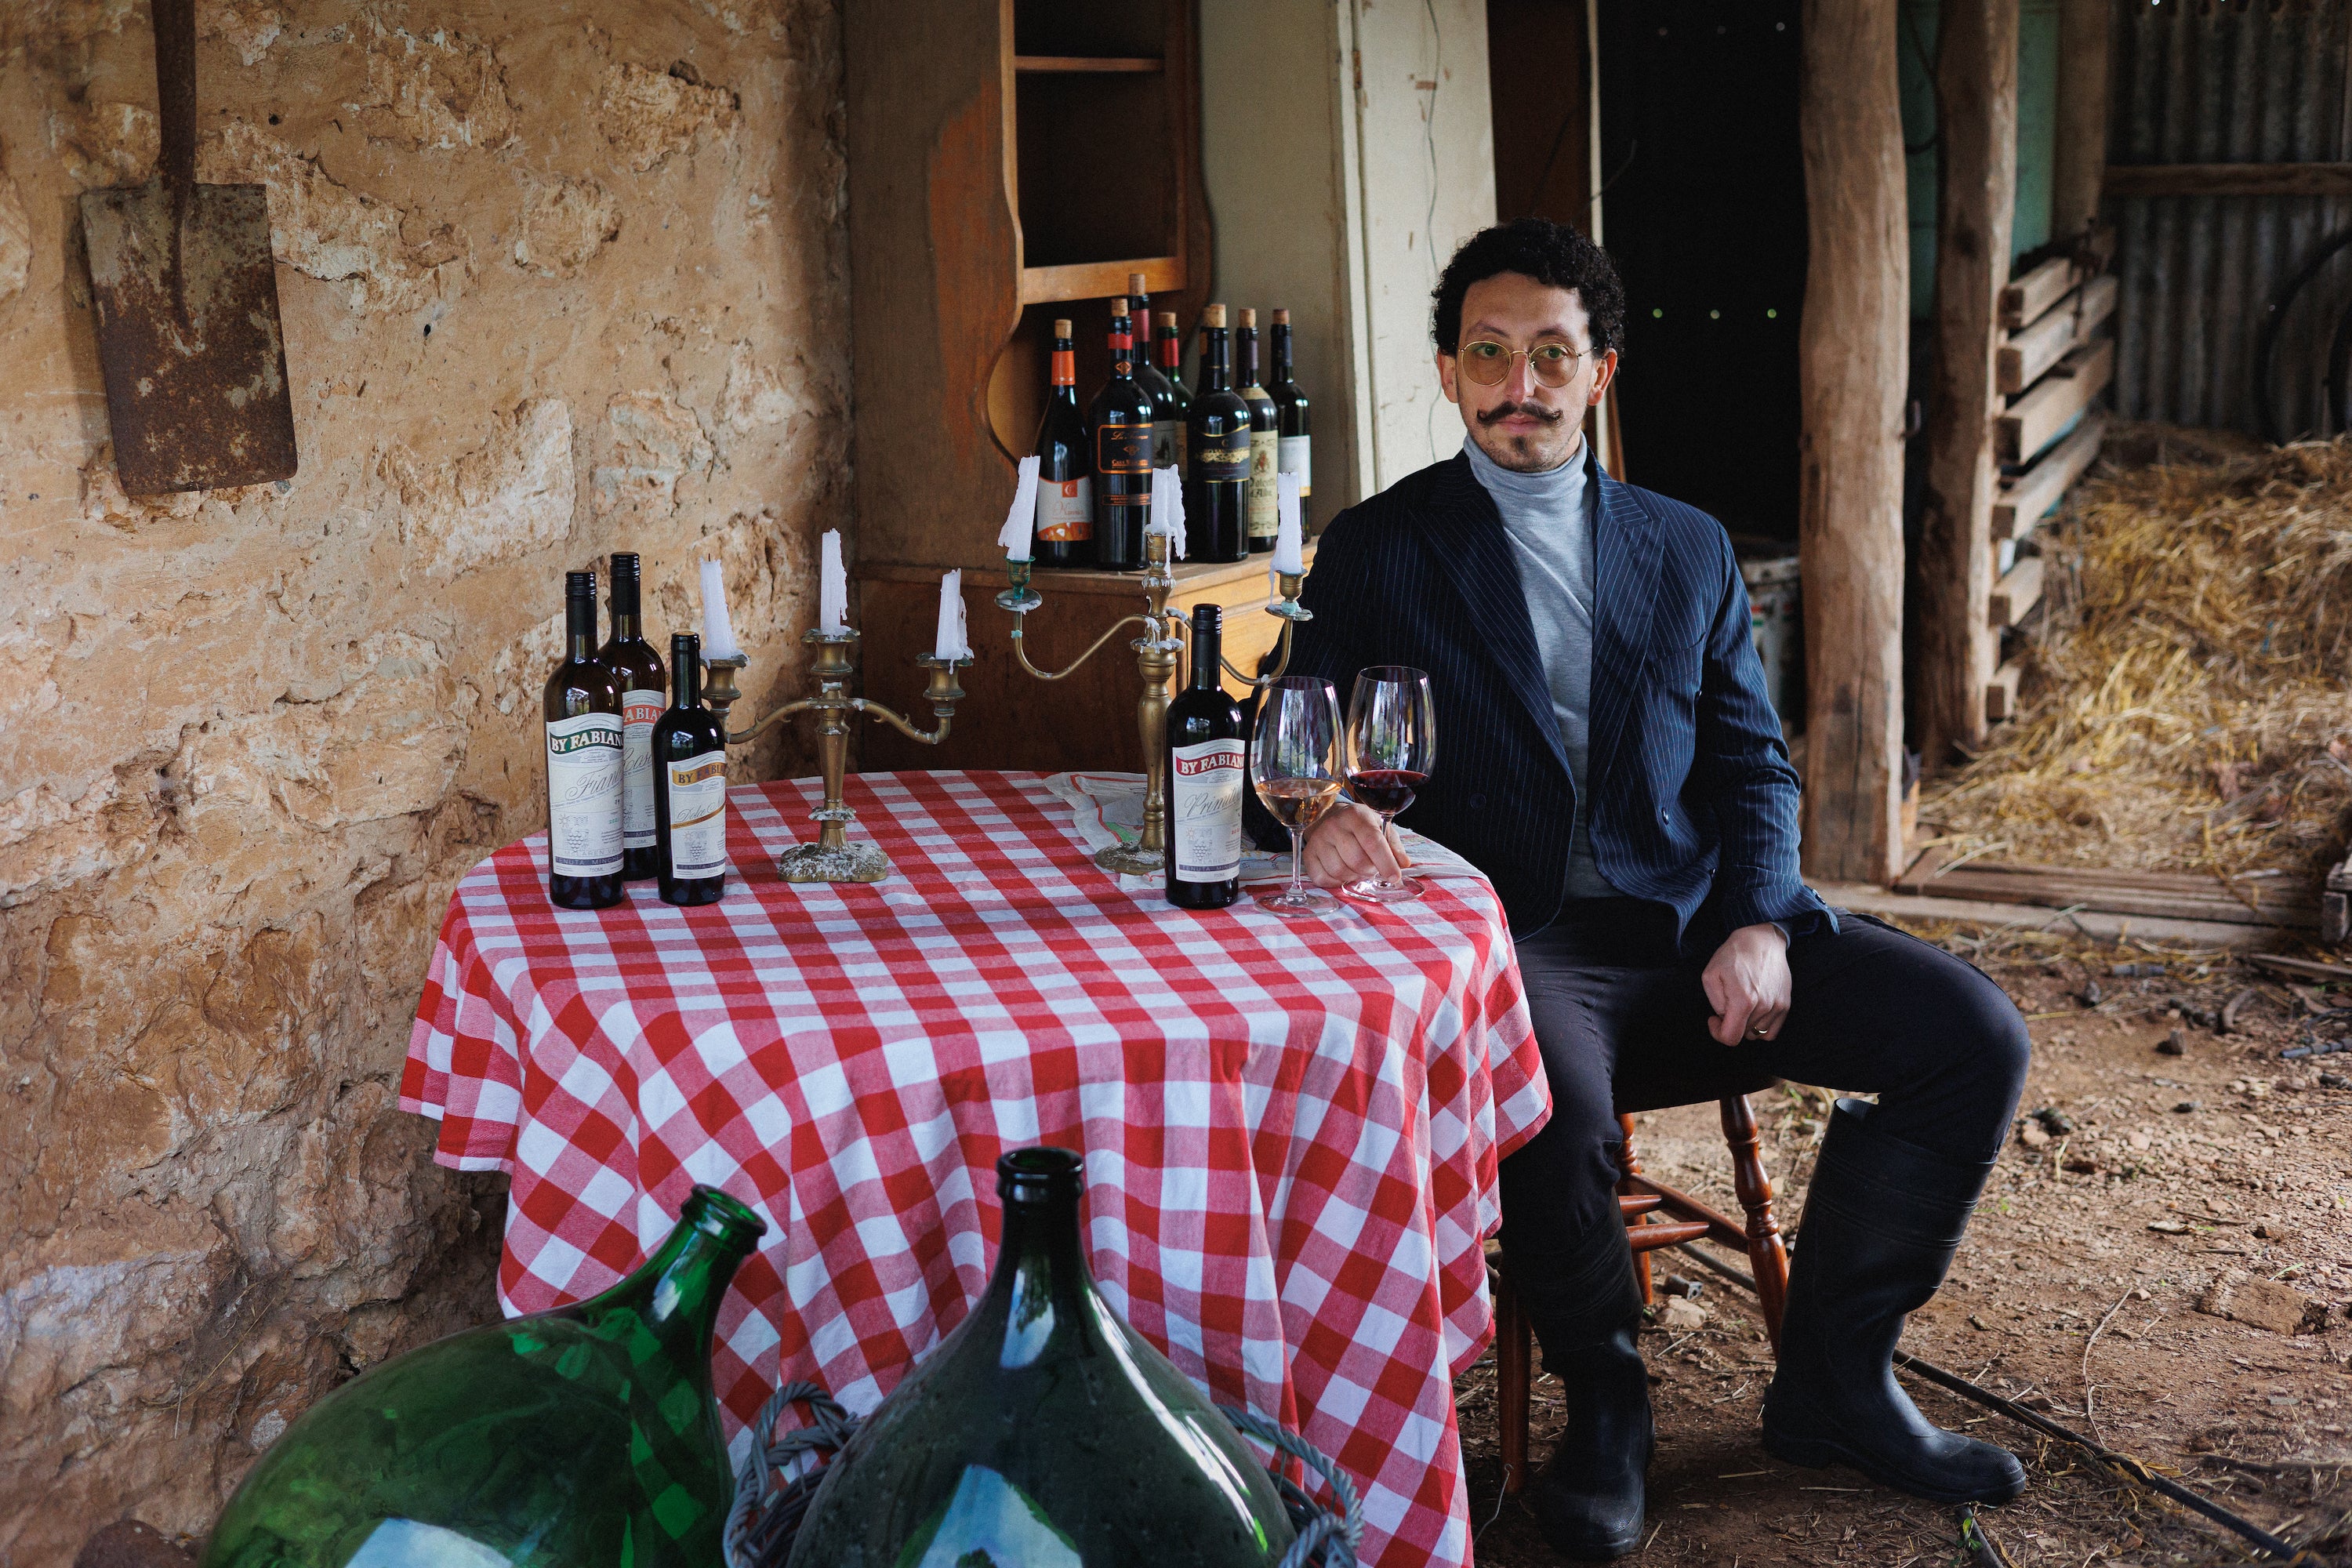 Fabiano sitting at a table with several bottles of By Fabiano wines and several glasses filed with wine.